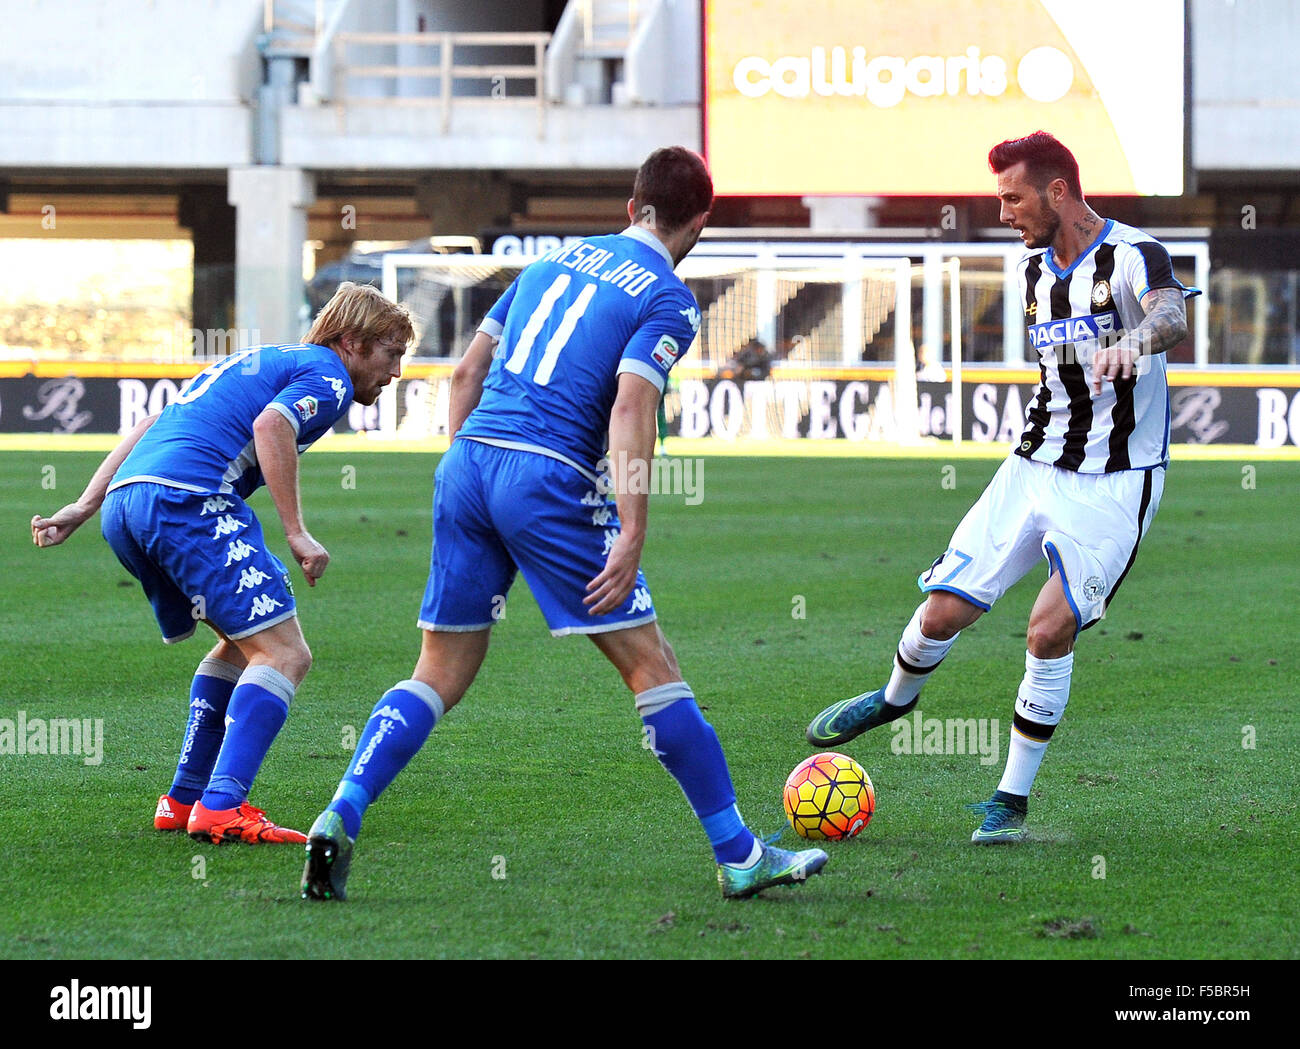 Udine, Italy Udinese's forward Cyril Thereau (R) controls the ball during the Italian Serie A TIM football match between Udinese Calcio and Sassuolo at Friuli Stadium on 01st November 2015. photo Simone Ferraro / Alamy Live News Stock Photo